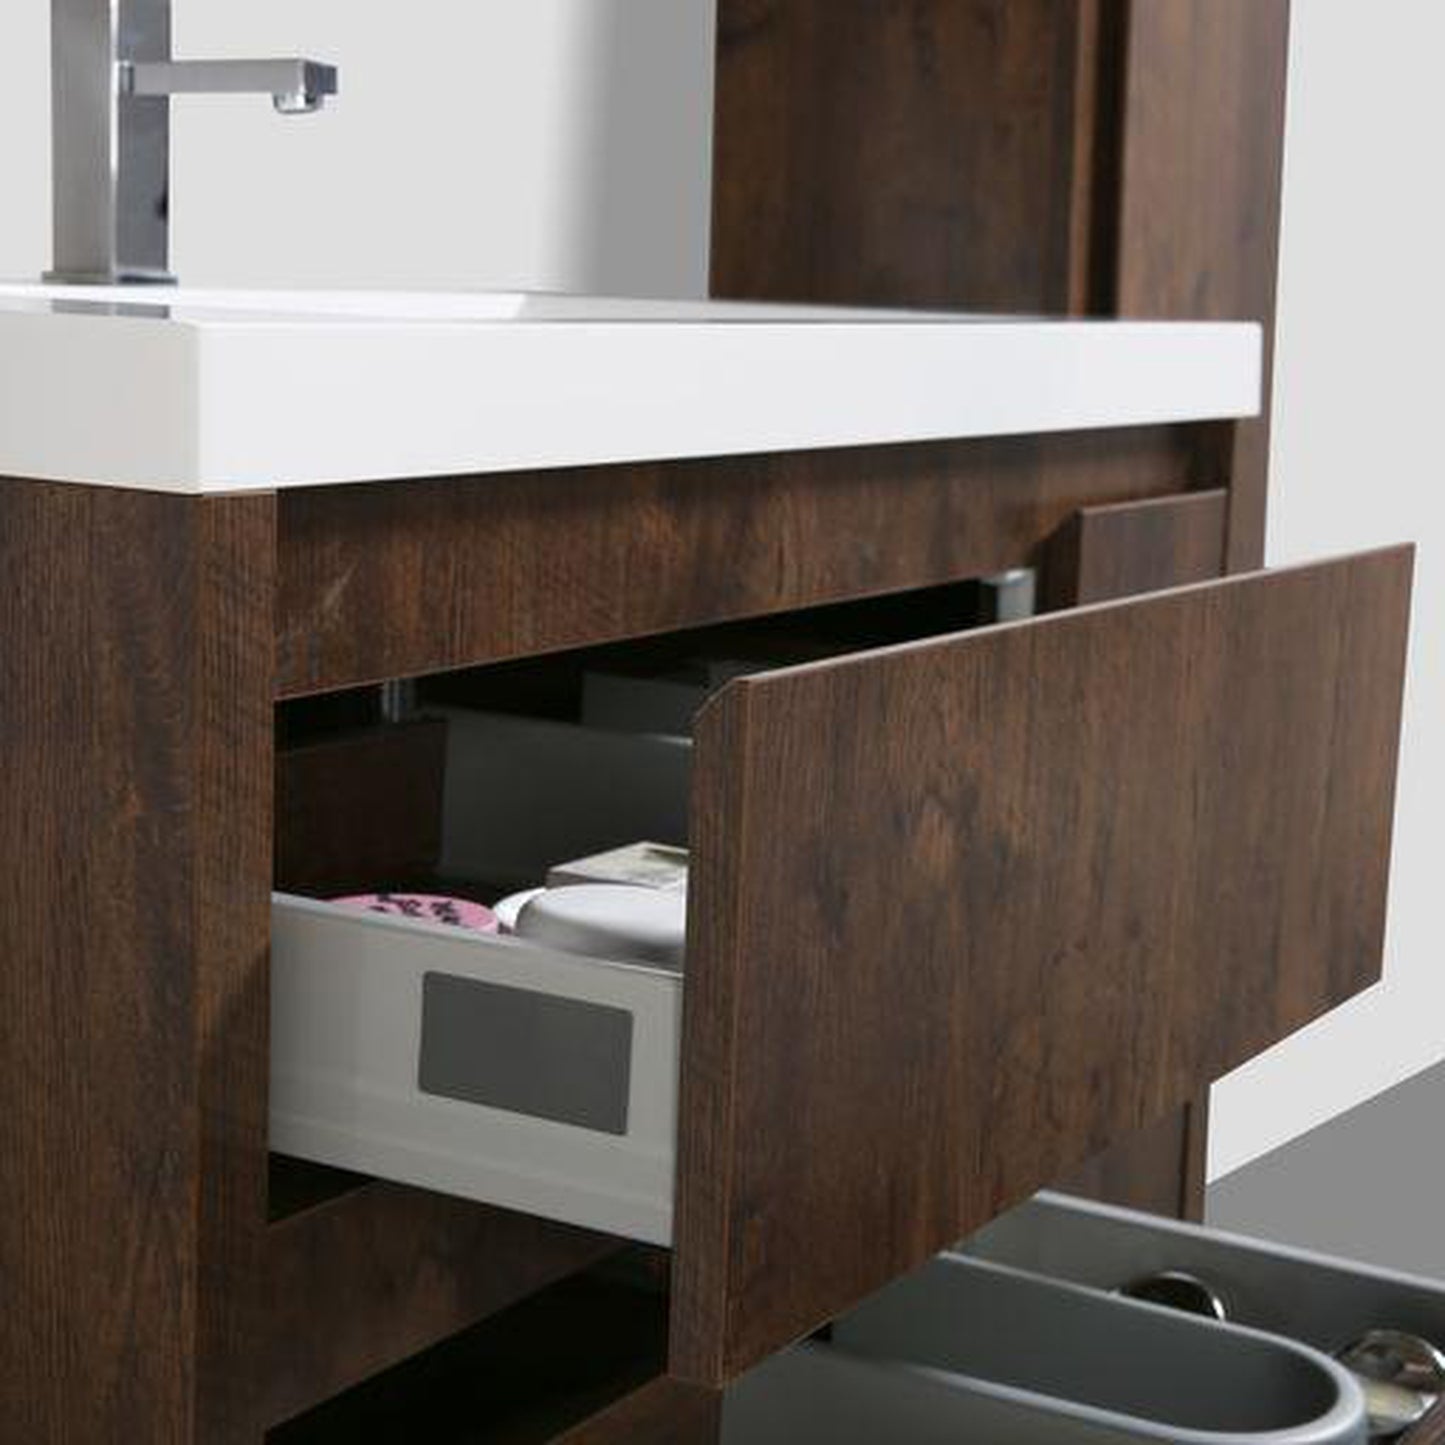 Moreno Bath Jade 36" Rosewood Wall-Mounted Vanity With Single Reinforced White Acrylic Sink